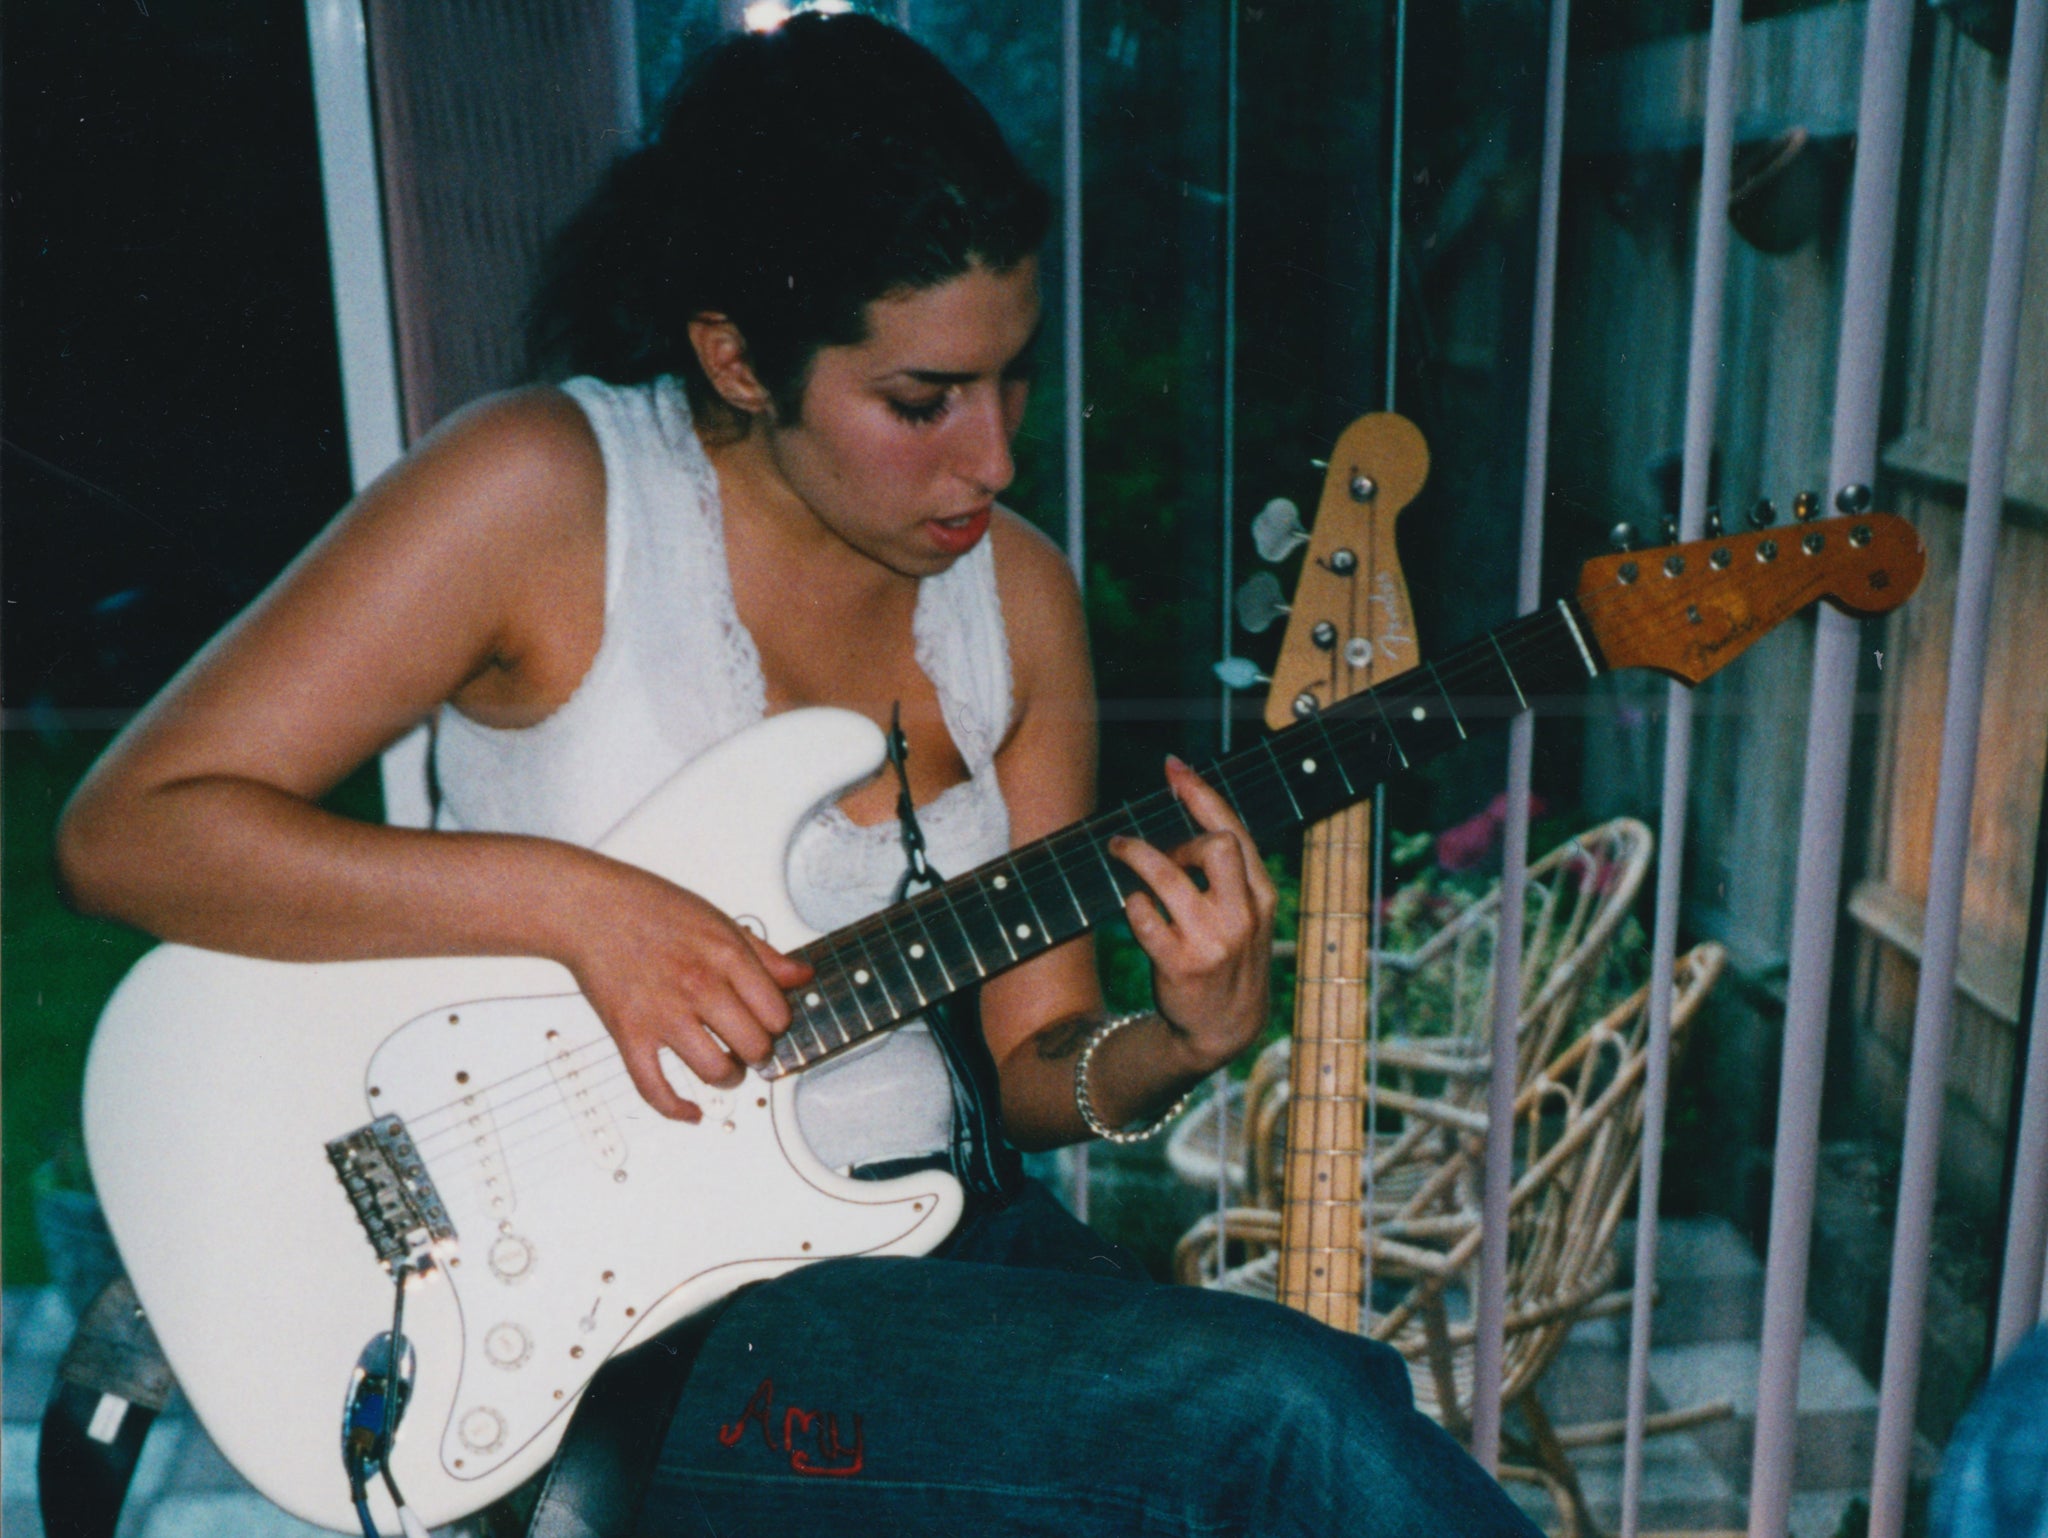 Amy Winehouse as a young girl, playing the guitar at her North London home